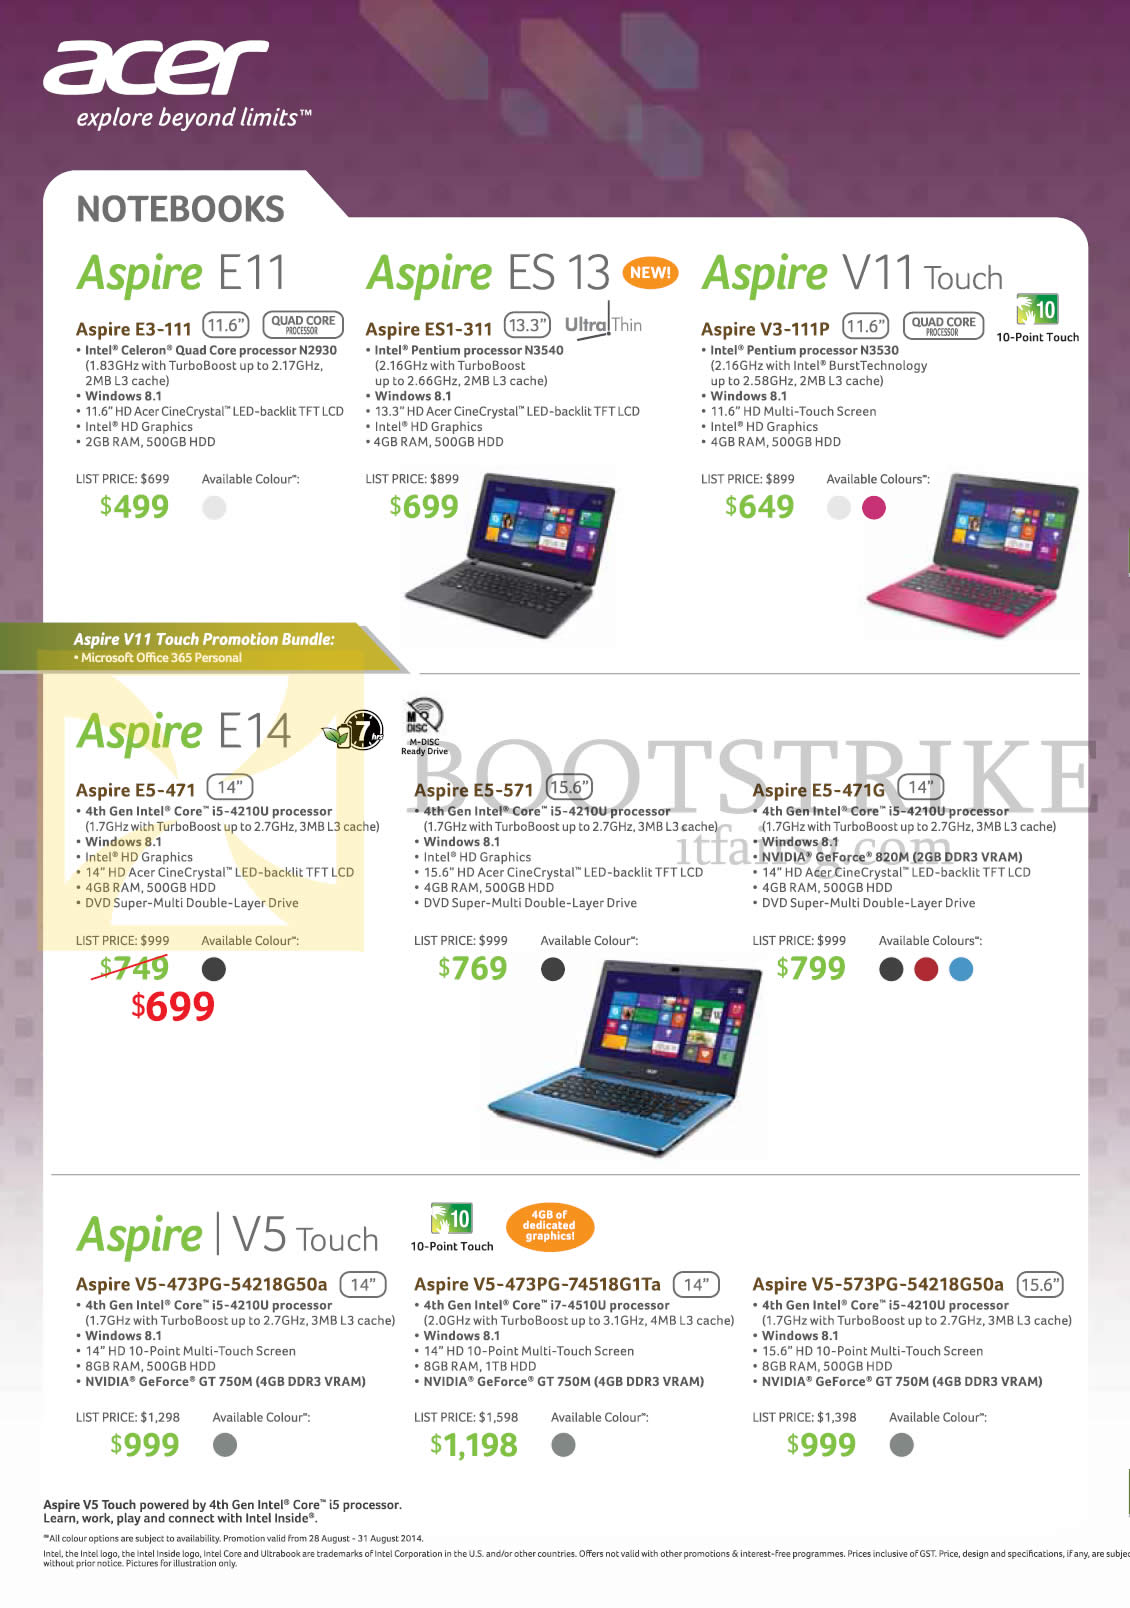 COMEX 2014 price list image brochure of Acer Notebooks Aspire E3-111, ES1-311, V3-111P, E5-471, E5-571, E5-471G, V5-473PG-54218G50a, V5-473PG-74518G1Ta, V5-573PG-54218G50a